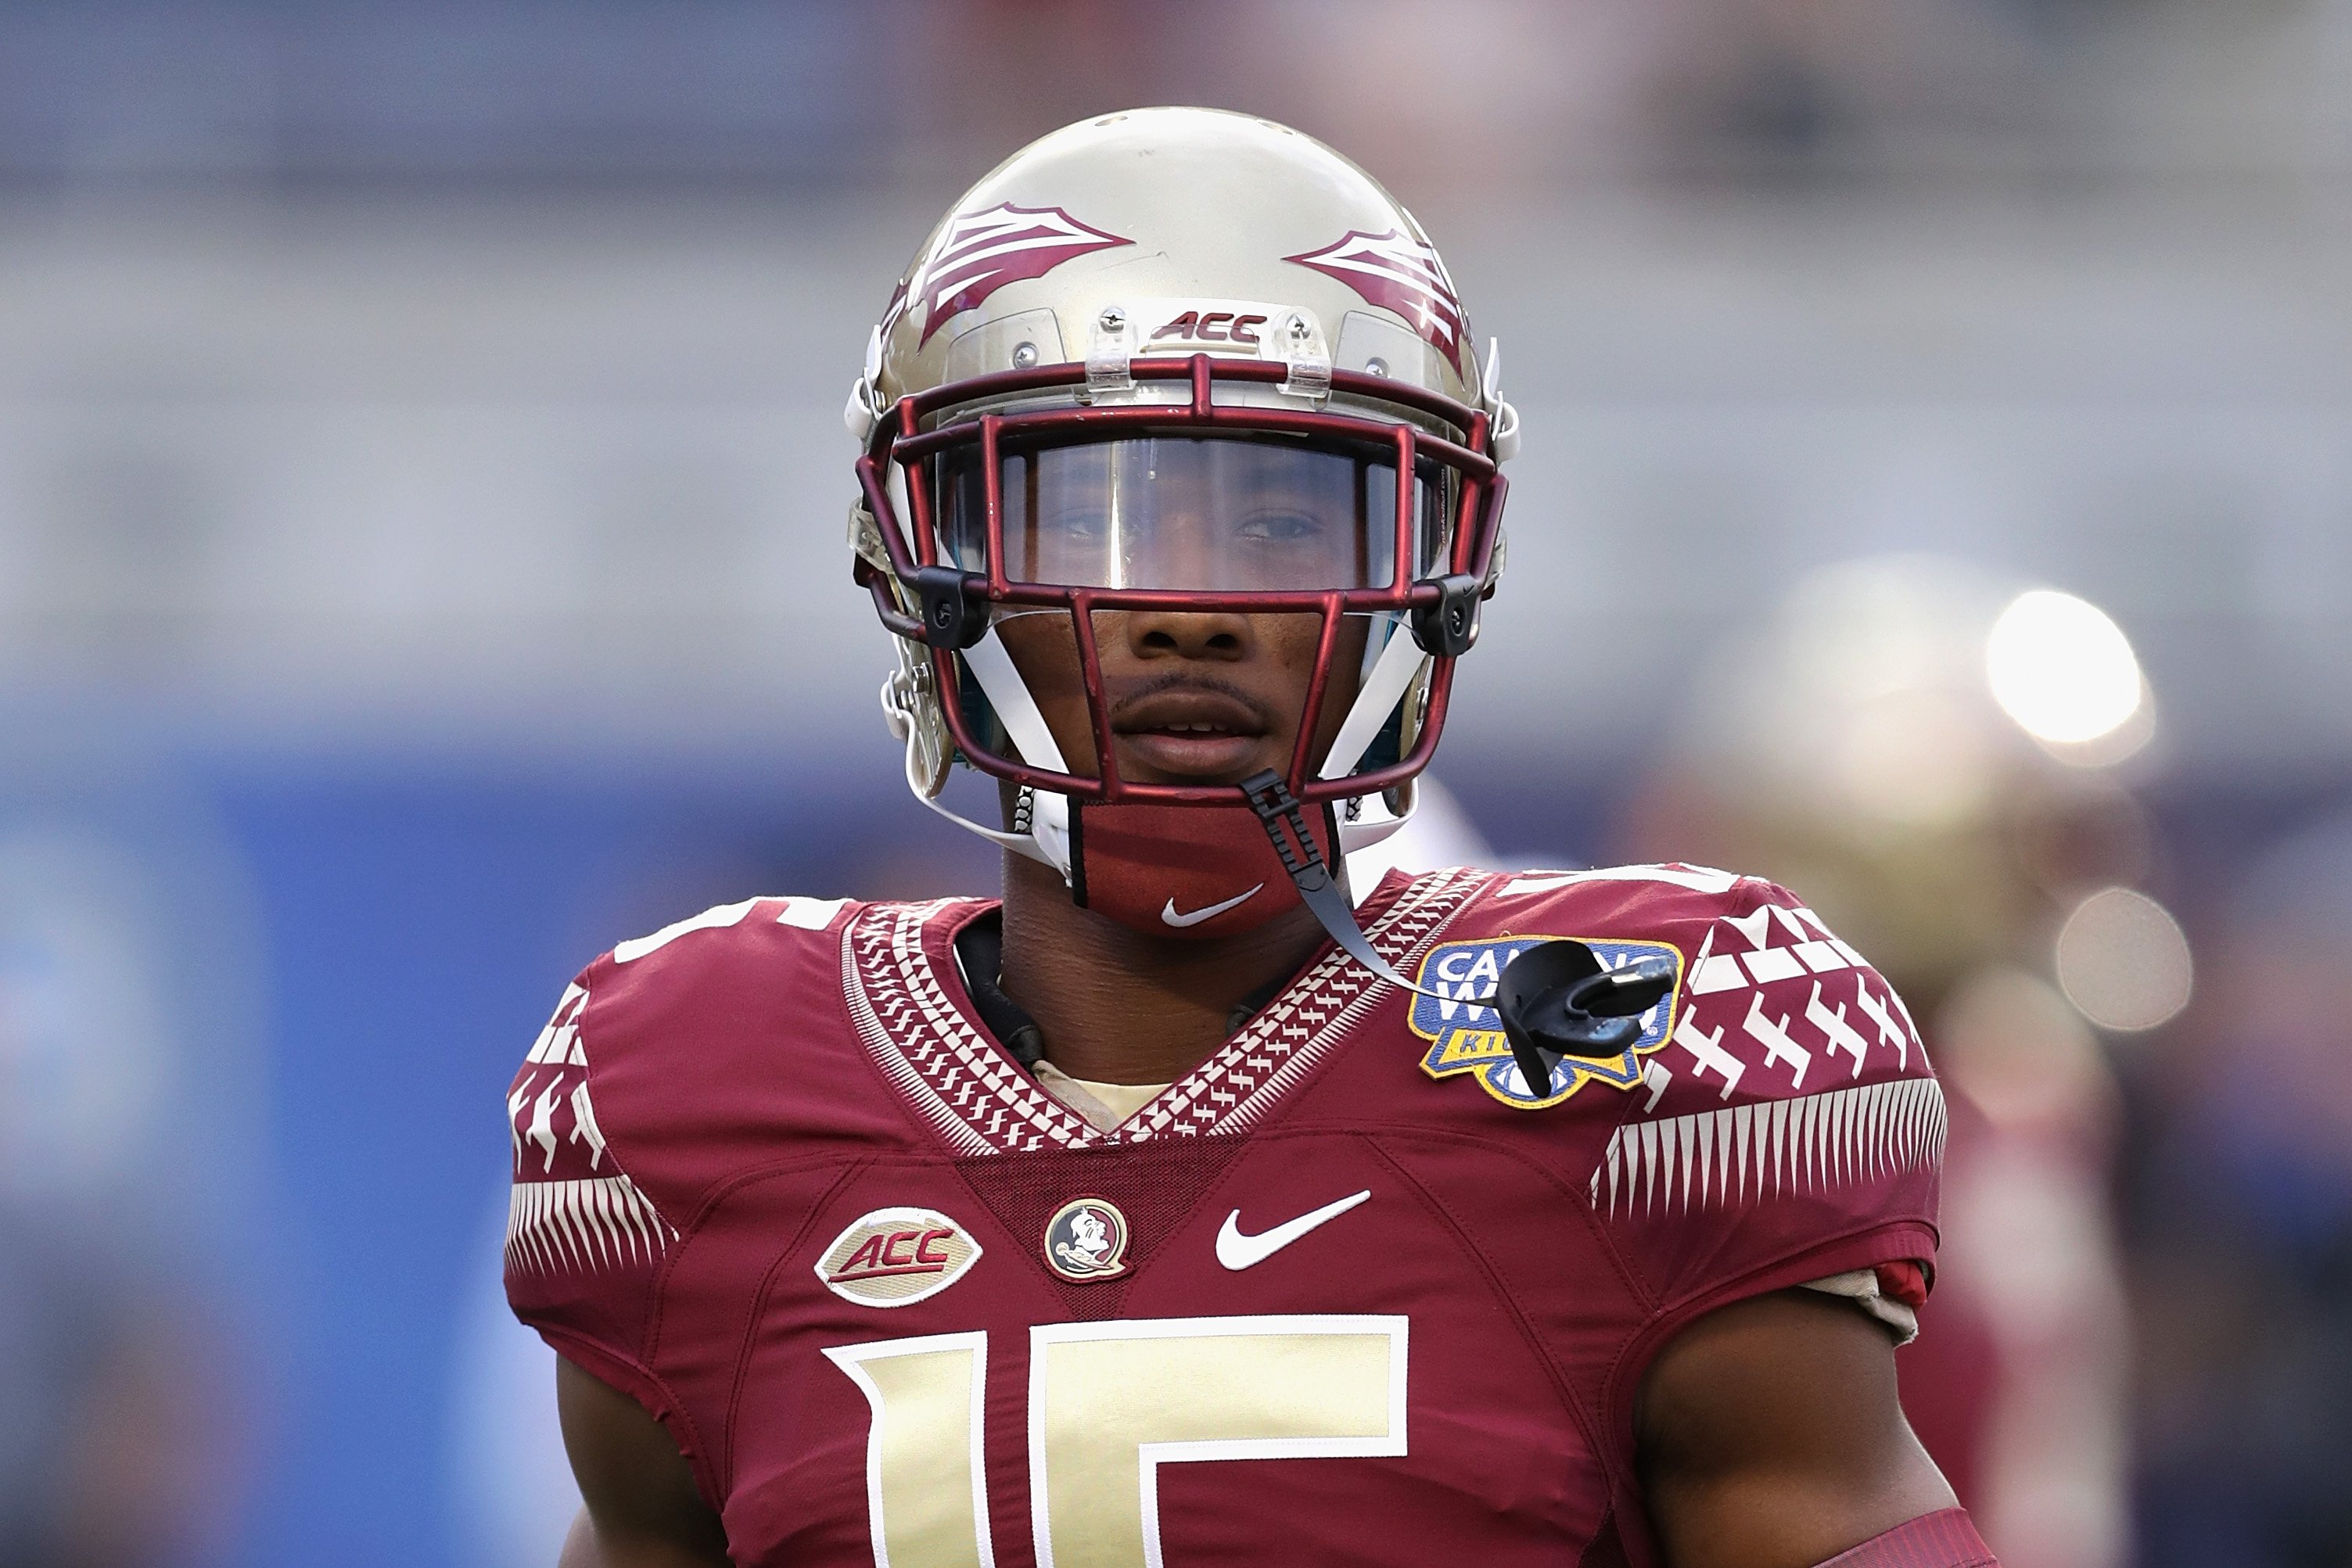 Travis Rudolph during a Florida State Seminoles game against the Mississippi Rebels on September 5, 2016 in Orlando, Florida. | Source: Getty Images